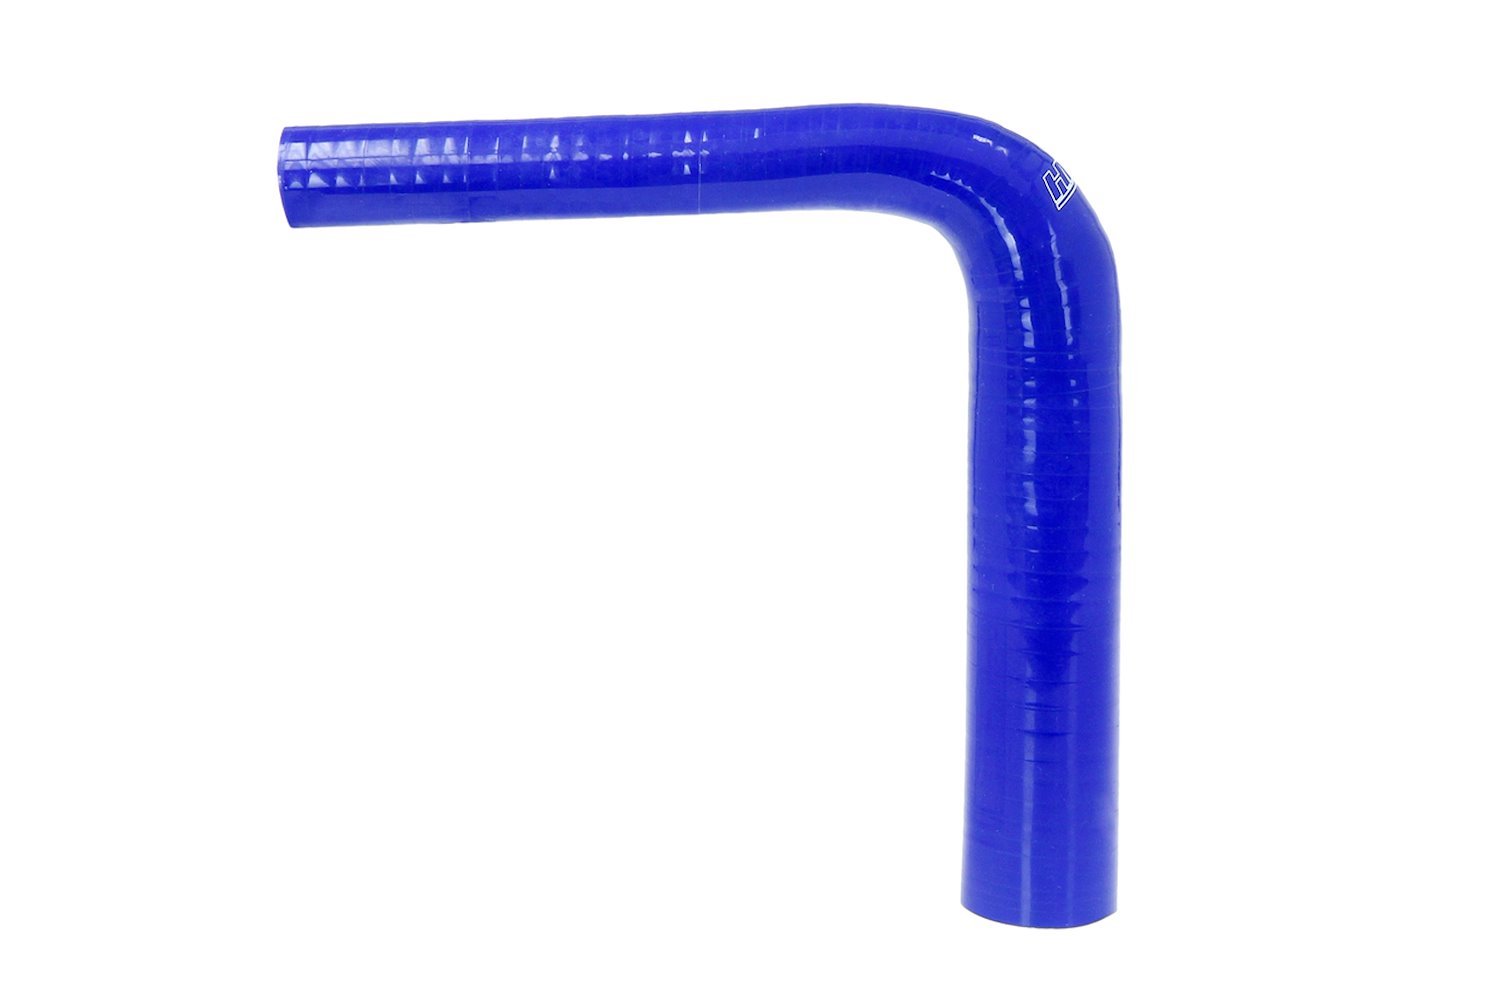 HTSER90-075-087-BLUE Silicone 90-Degree Elbow Hose, High-Temp 4-Ply Reinforced, 3/4 in. - 7/8 in. ID, Blue